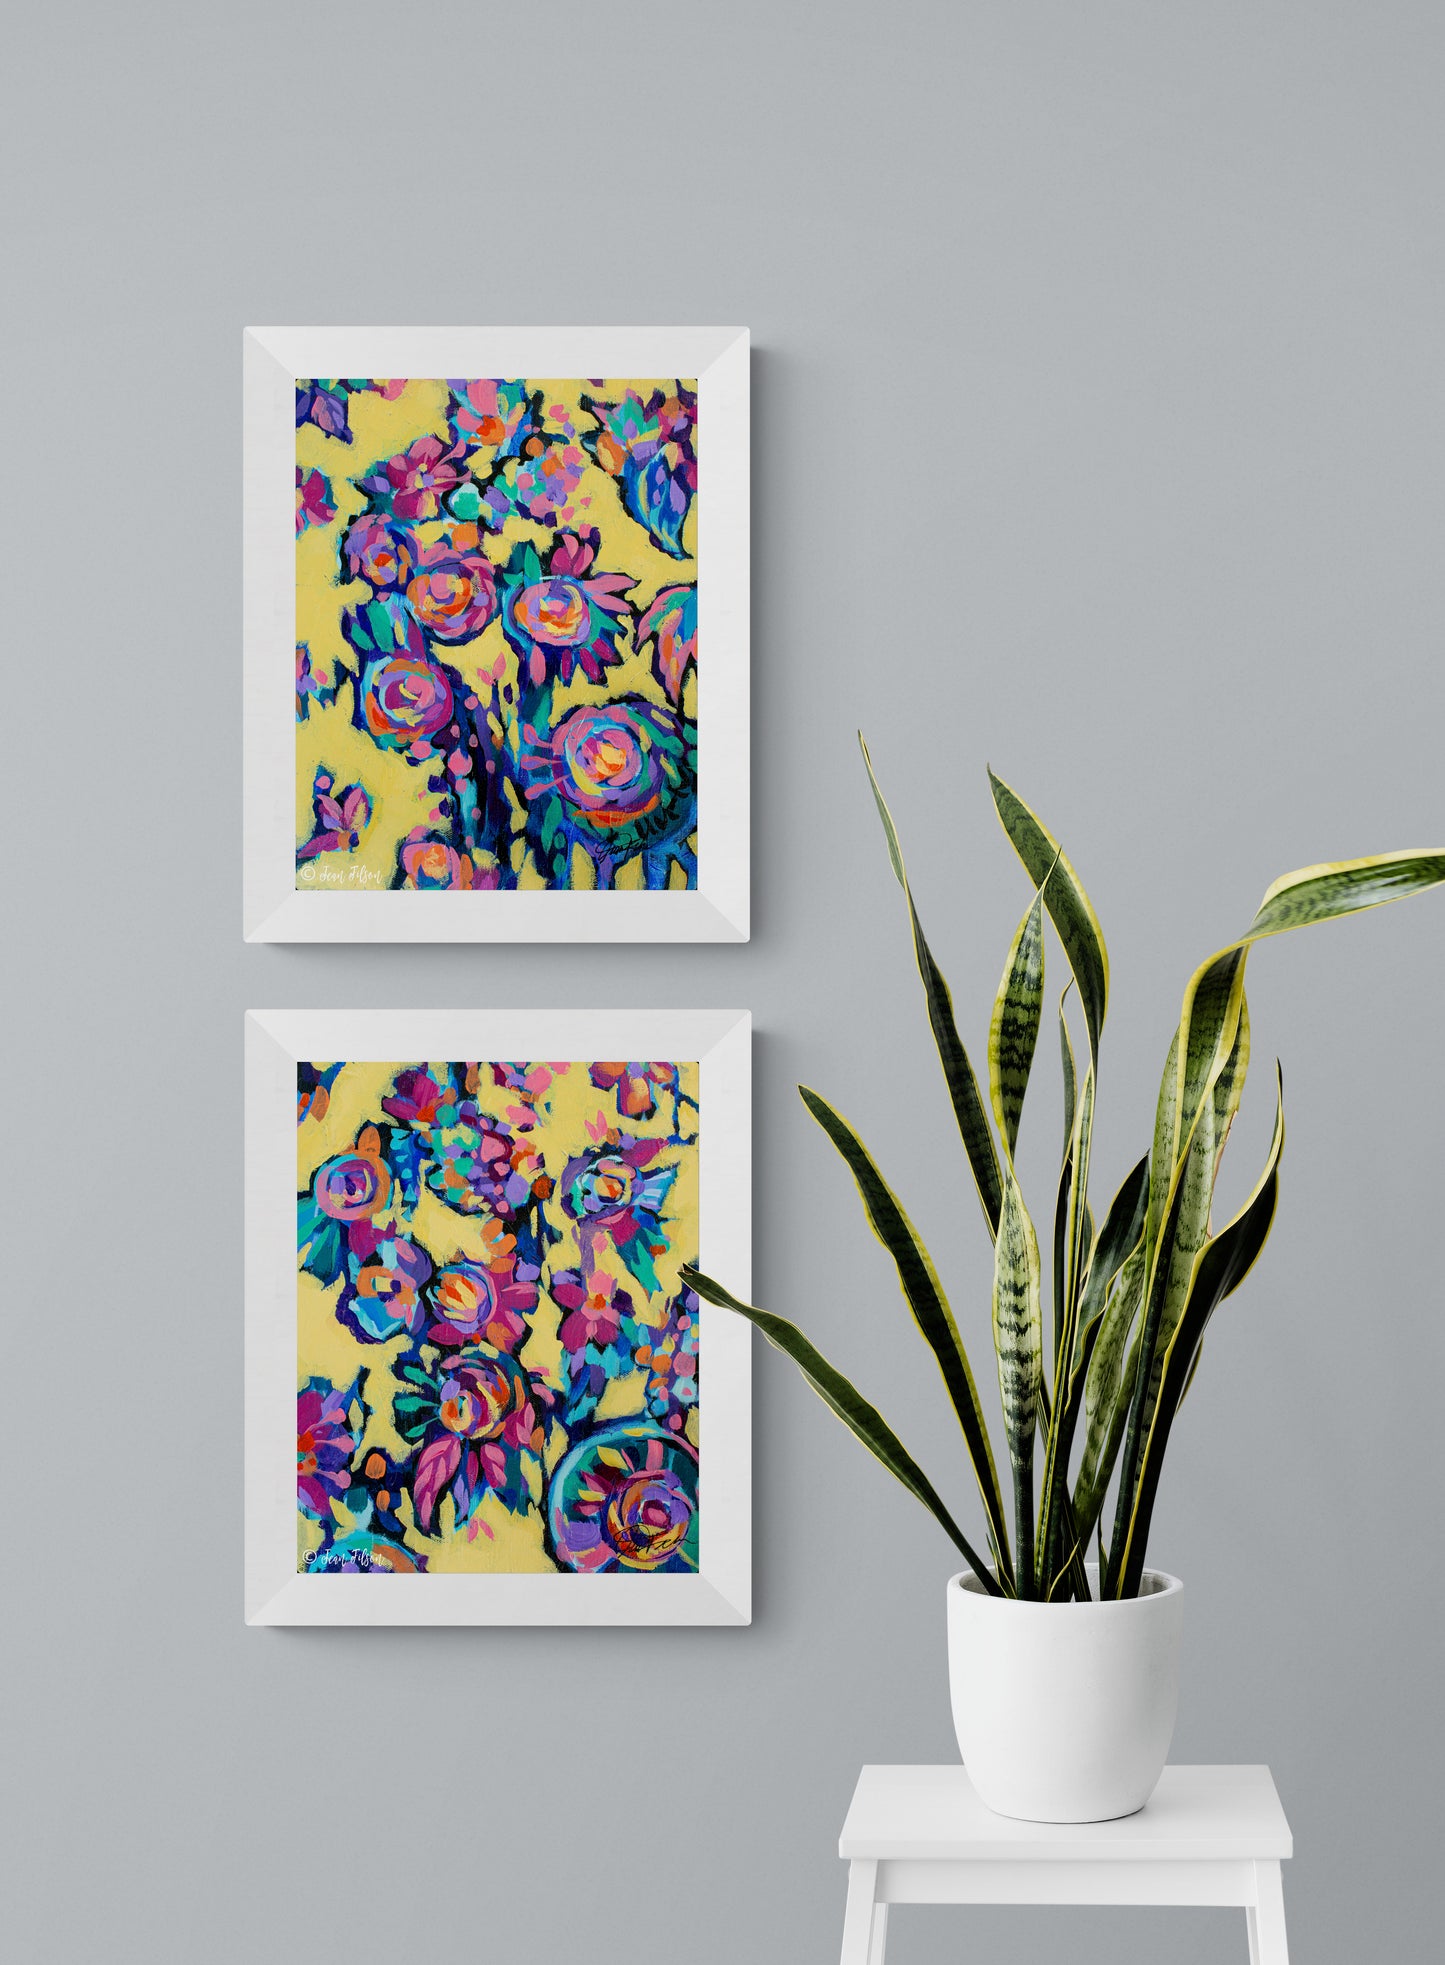 SUN GARDEN 1&2, Set of 2 Original abstract canvas painting for sale, Abstract Art floral